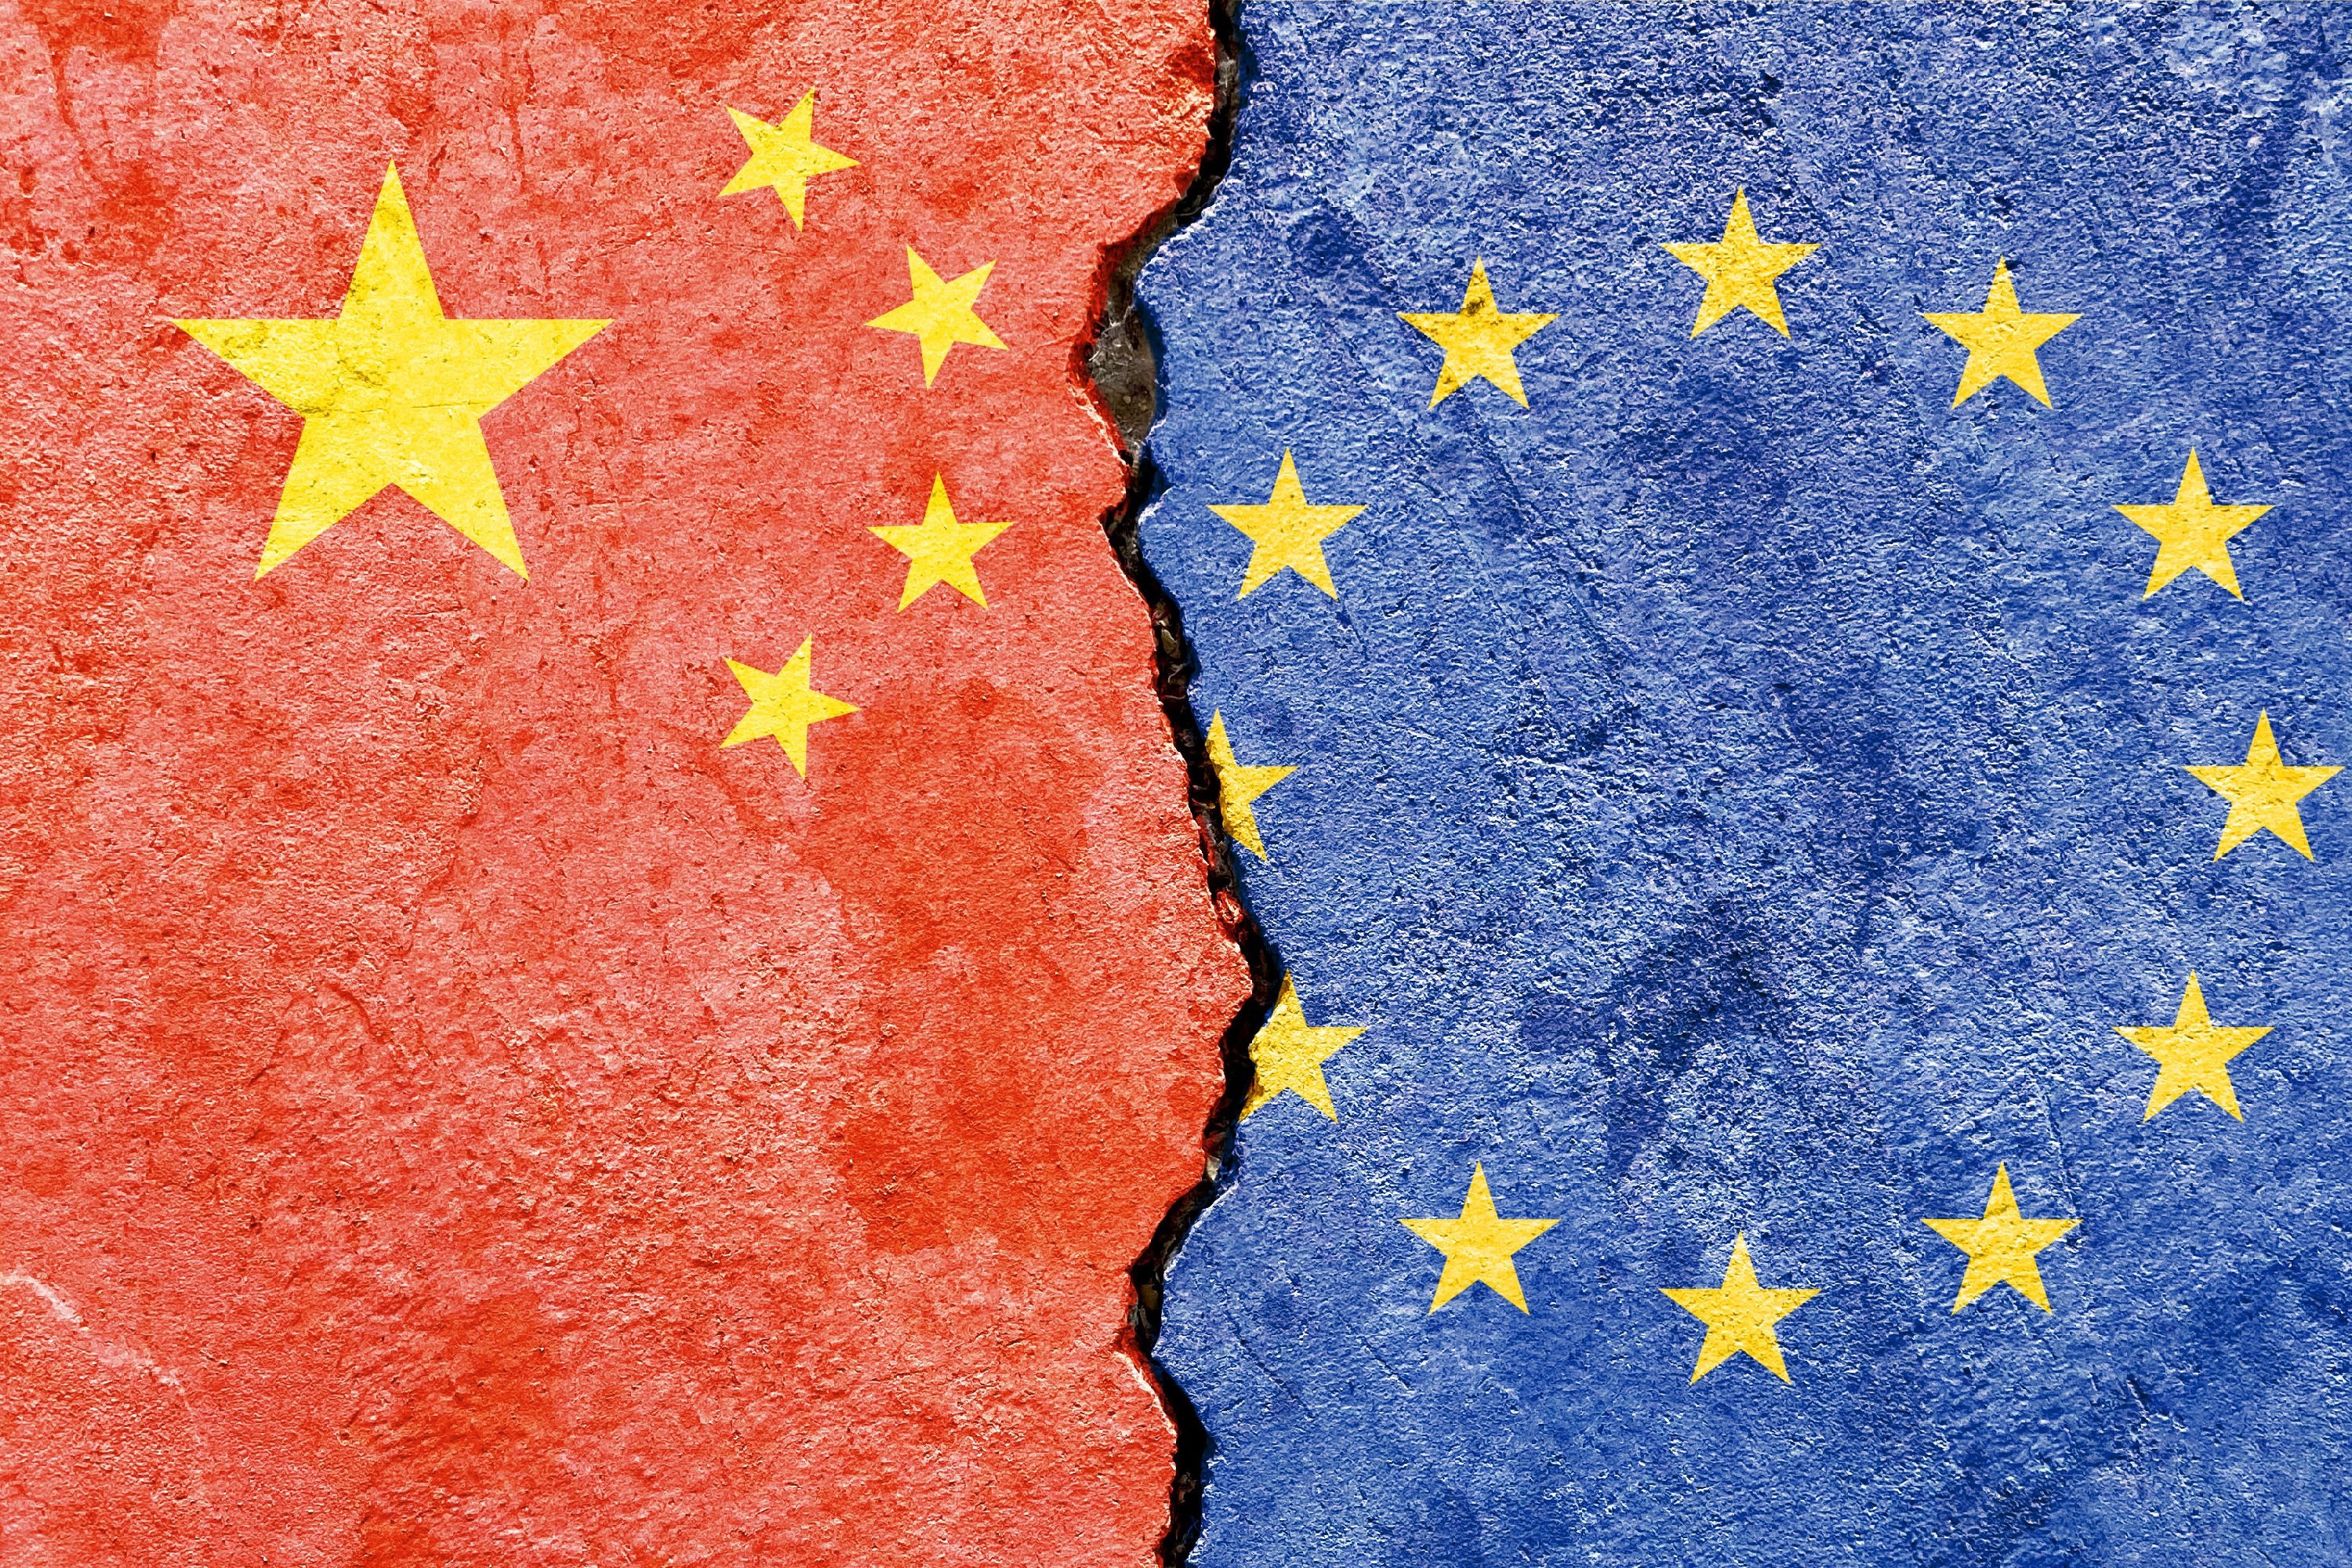 The summit of Chinese and European Union leaders in Beijing is not expected to produce any major breakthroughs in the fraying relationship, analysts said. Photo: Shutterstock